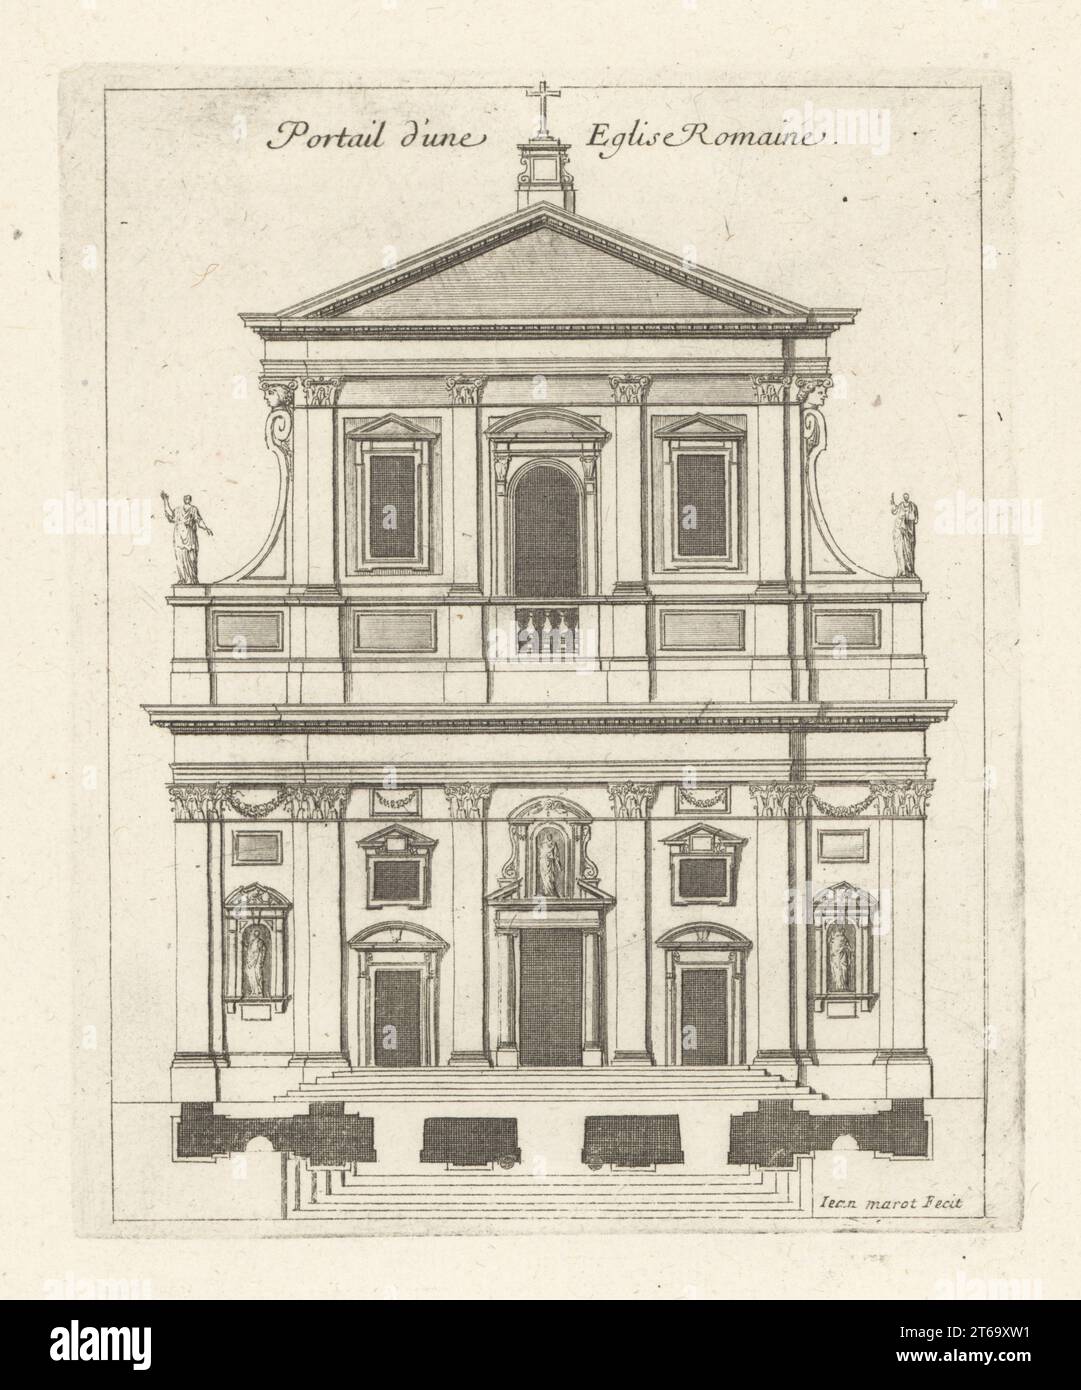 Facade of a Roman church. Portail d'une Eglise Romaine. Copperplate engraving drawn and engraved by Jean Marot from his Recueil des Plans, Profils et Elevations de Plusieurs Palais, Chasteaux, Eglises, Sepultures, Grotes et Hotels, Collection of Plans, Profiles and Elevations of Palaces, Castles, Churches, Tombs, Grottos and Hotels, chez Mariette, Paris, 1655. Stock Photo